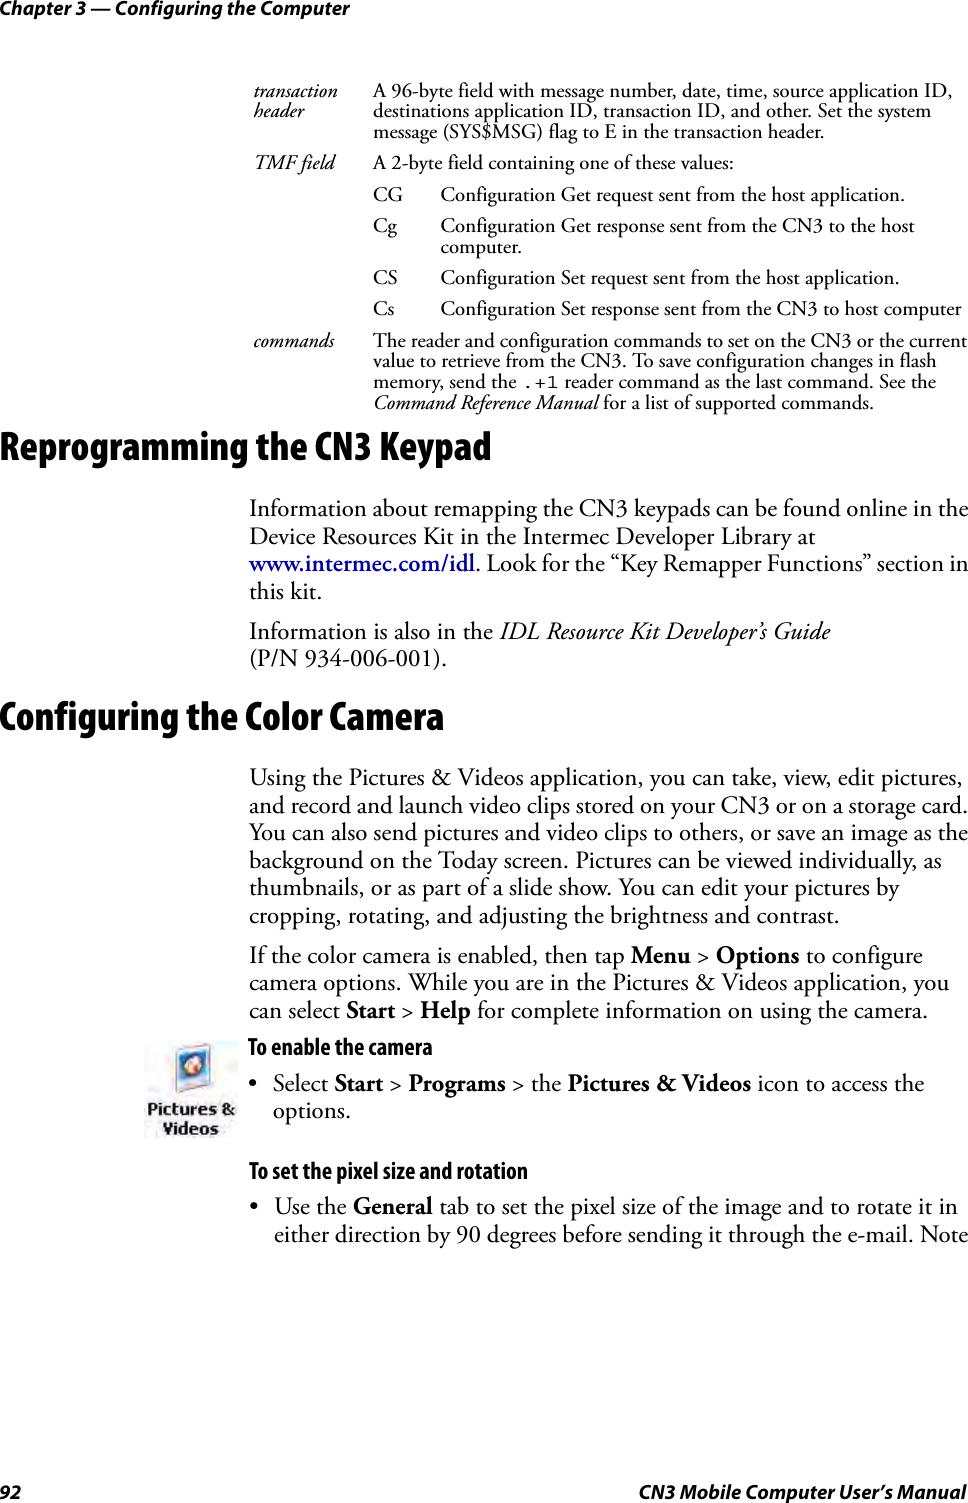 Chapter 3 — Configuring the Computer92 CN3 Mobile Computer User’s ManualReprogramming the CN3 KeypadInformation about remapping the CN3 keypads can be found online in the Device Resources Kit in the Intermec Developer Library at www.intermec.com/idl. Look for the “Key Remapper Functions” section in this kit.Information is also in the IDL Resource Kit Developer’s Guide (P/N 934-006-001).Configuring the Color CameraUsing the Pictures &amp; Videos application, you can take, view, edit pictures, and record and launch video clips stored on your CN3 or on a storage card. You can also send pictures and video clips to others, or save an image as the background on the Today screen. Pictures can be viewed individually, as thumbnails, or as part of a slide show. You can edit your pictures by cropping, rotating, and adjusting the brightness and contrast.If the color camera is enabled, then tap Menu &gt; Options to configure camera options. While you are in the Pictures &amp; Videos application, you can select Start &gt; Help for complete information on using the camera. To set the pixel size and rotation•Use the General tab to set the pixel size of the image and to rotate it in either direction by 90 degrees before sending it through the e-mail. Note transaction headerA 96-byte field with message number, date, time, source application ID, destinations application ID, transaction ID, and other. Set the system message (SYS$MSG) flag to E in the transaction header.TMF field A 2-byte field containing one of these values:CG Configuration Get request sent from the host application.Cg Configuration Get response sent from the CN3 to the host computer.CS Configuration Set request sent from the host application.Cs Configuration Set response sent from the CN3 to host computercommands The reader and configuration commands to set on the CN3 or the current value to retrieve from the CN3. To save configuration changes in flash memory, send the .+1 reader command as the last command. See the Command Reference Manual for a list of supported commands.To enable the camera• Select Start &gt; Programs &gt; the Pictures &amp; Videos icon to access the options.